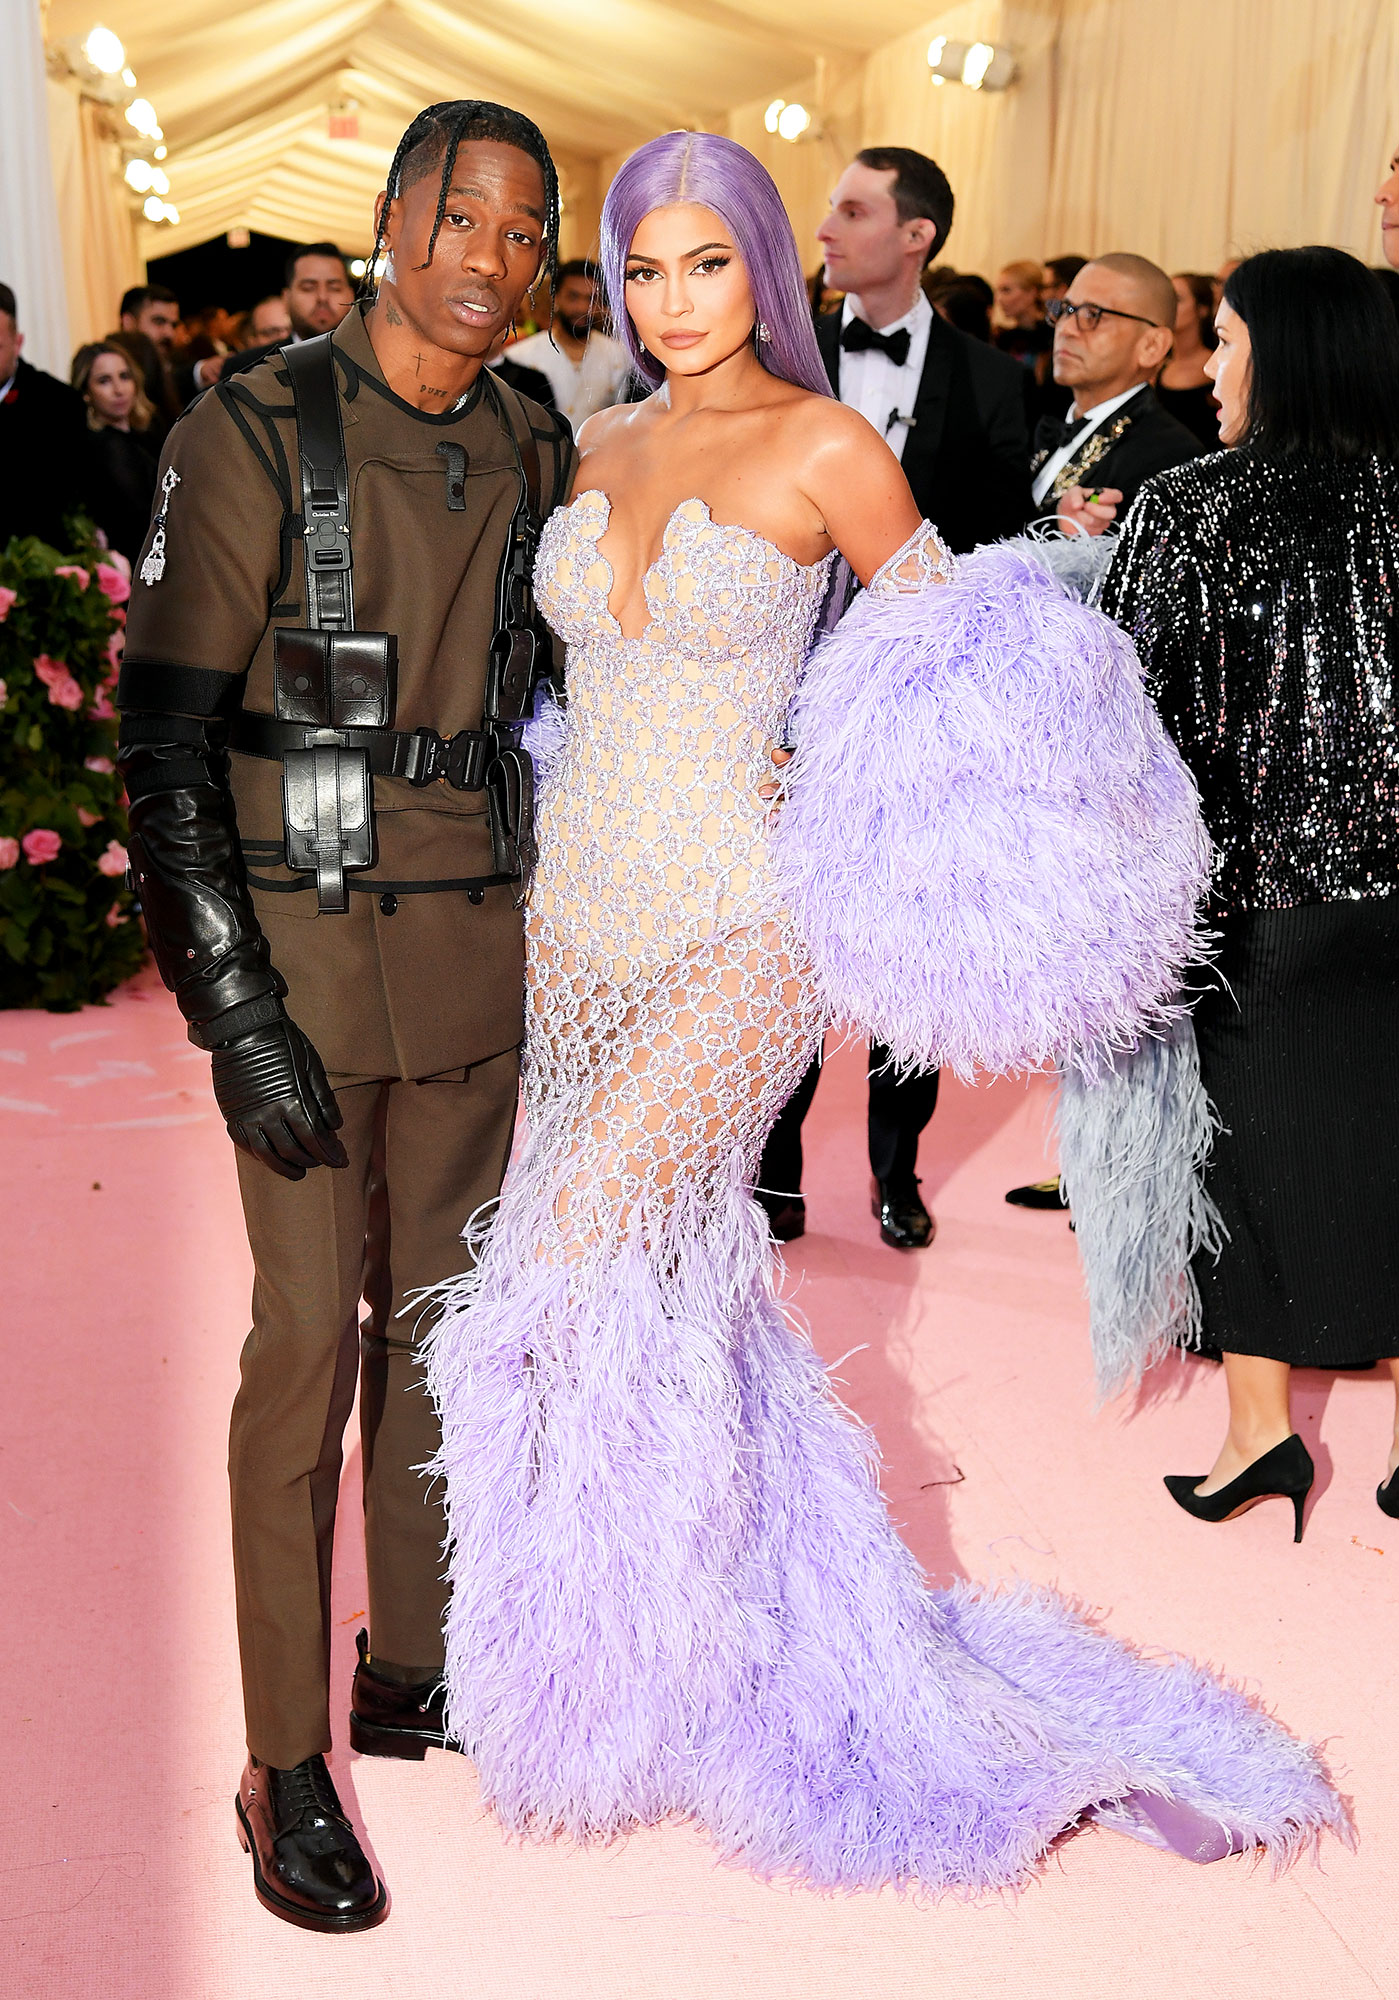 Met Gala 2019 Red Carpet Fashion: Hottest Couples, Duos Style